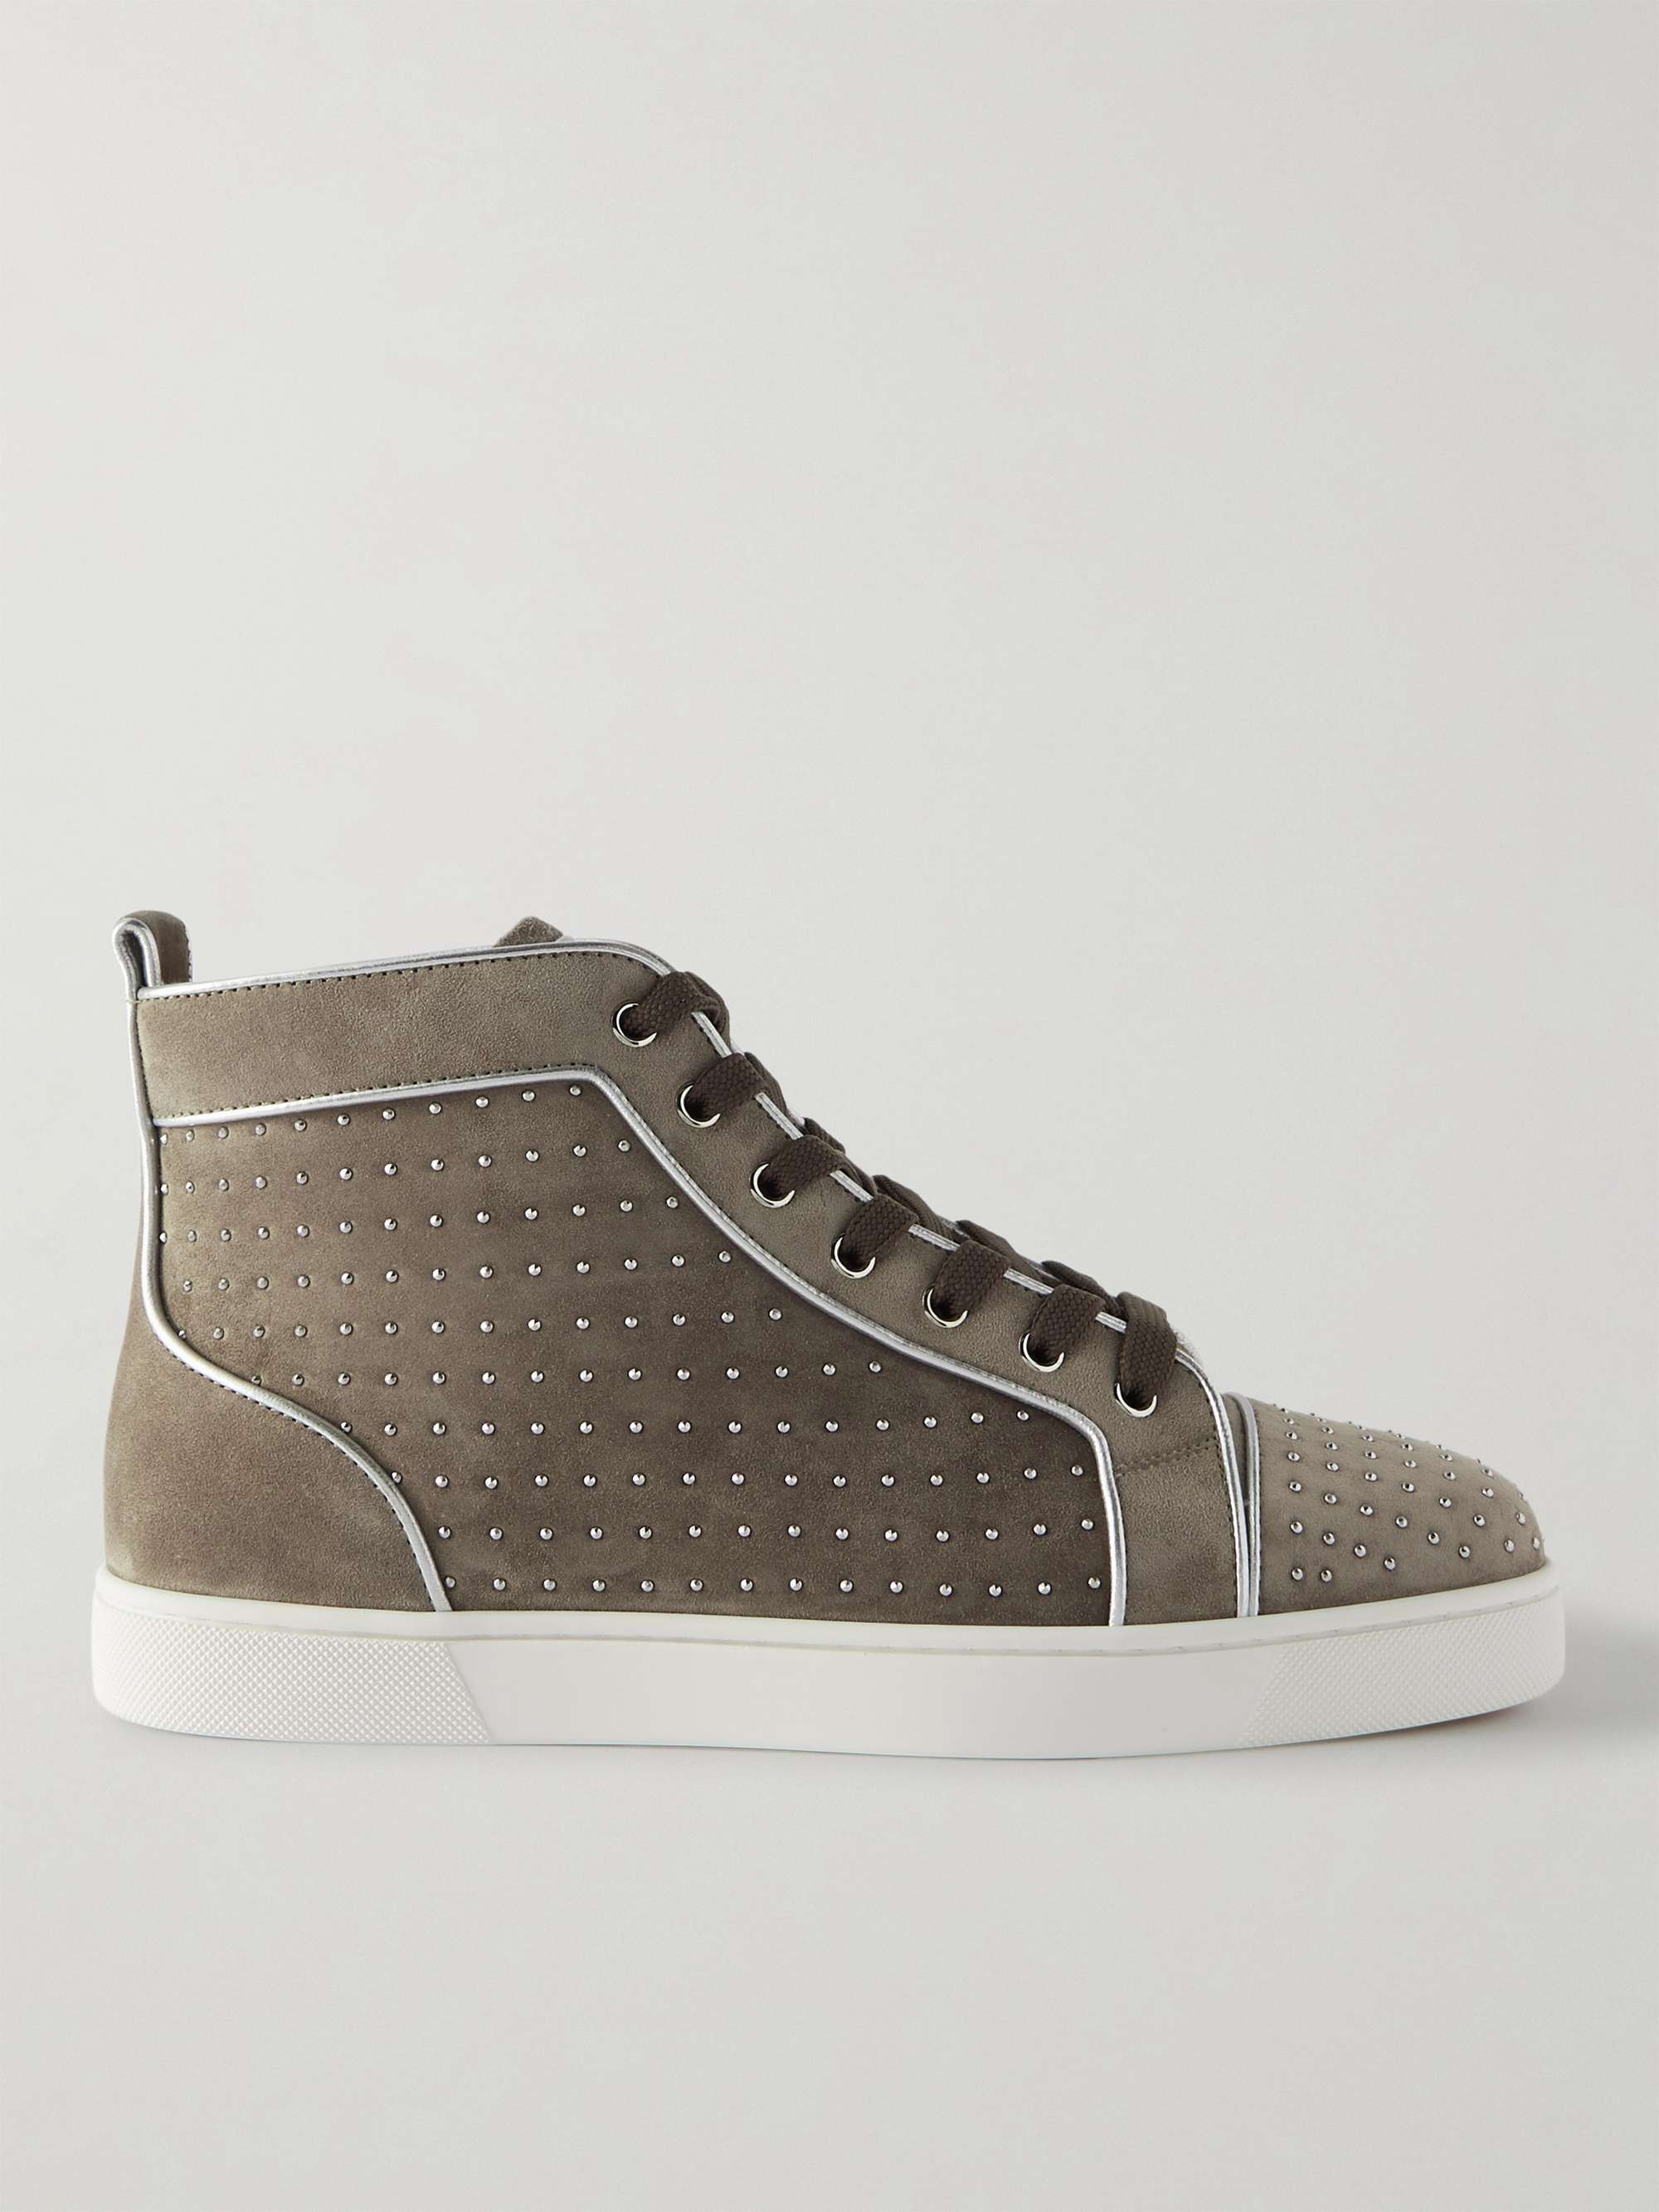 Dark gray Louix Ray Spiked PVC High-Top Sneakers | CHRISTIAN 